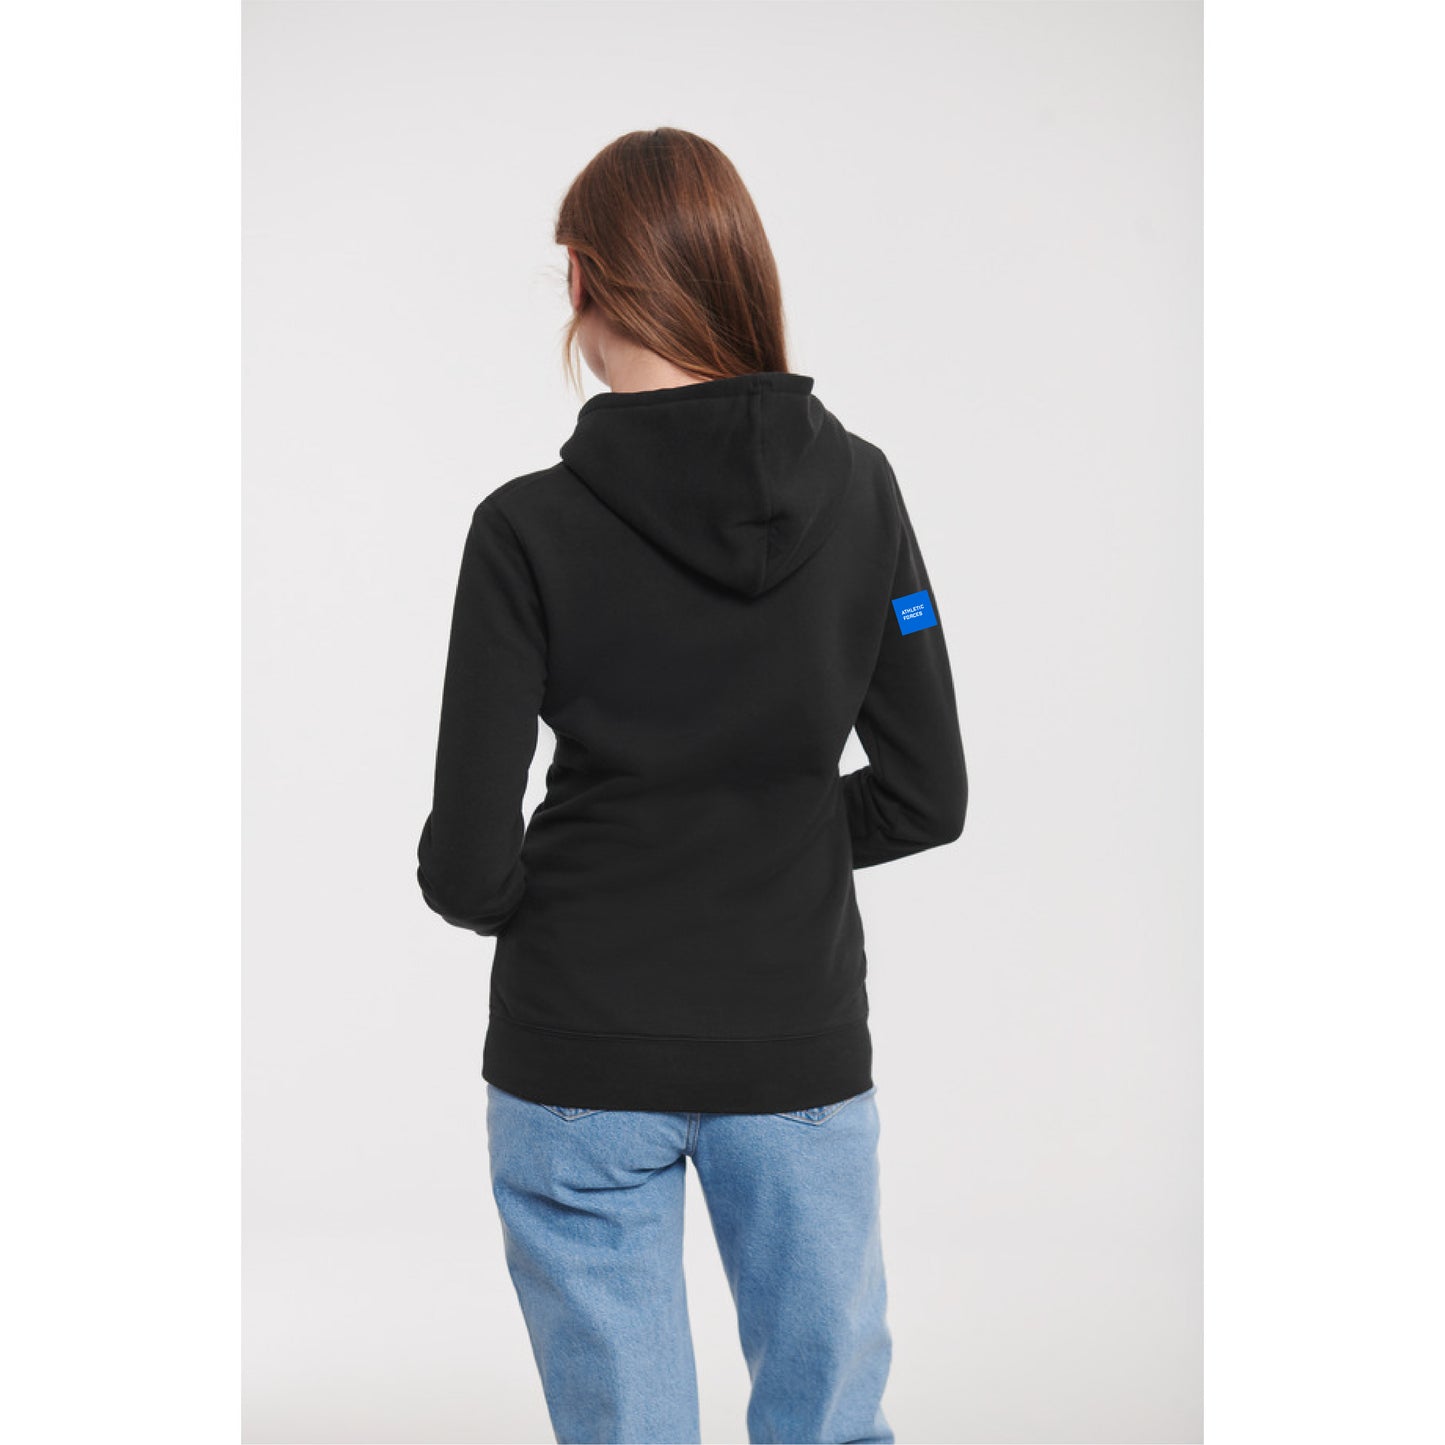 Marine Force Fluctuation Identity Hoodie